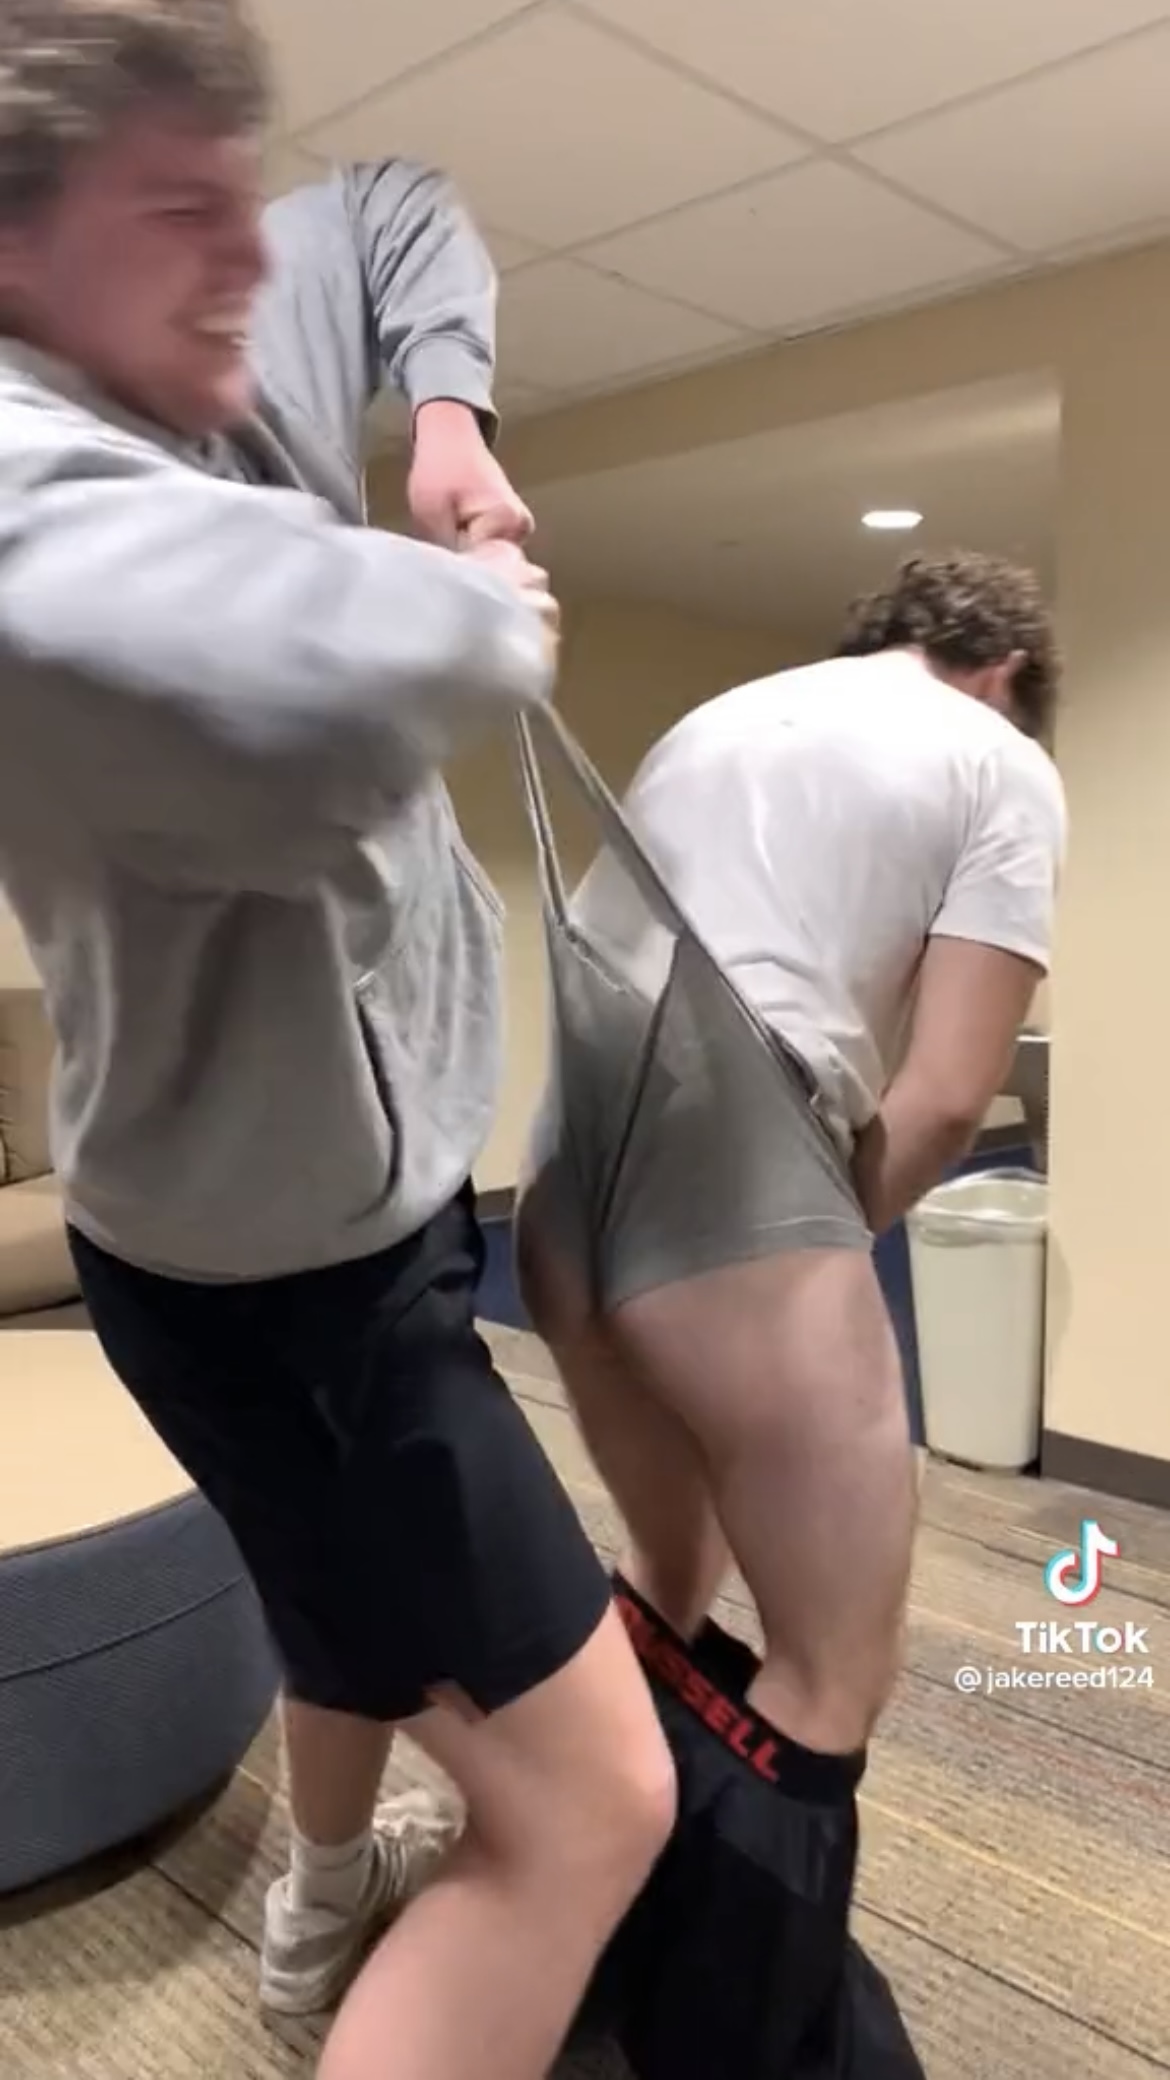 Three str8 dudes who should fuck each other